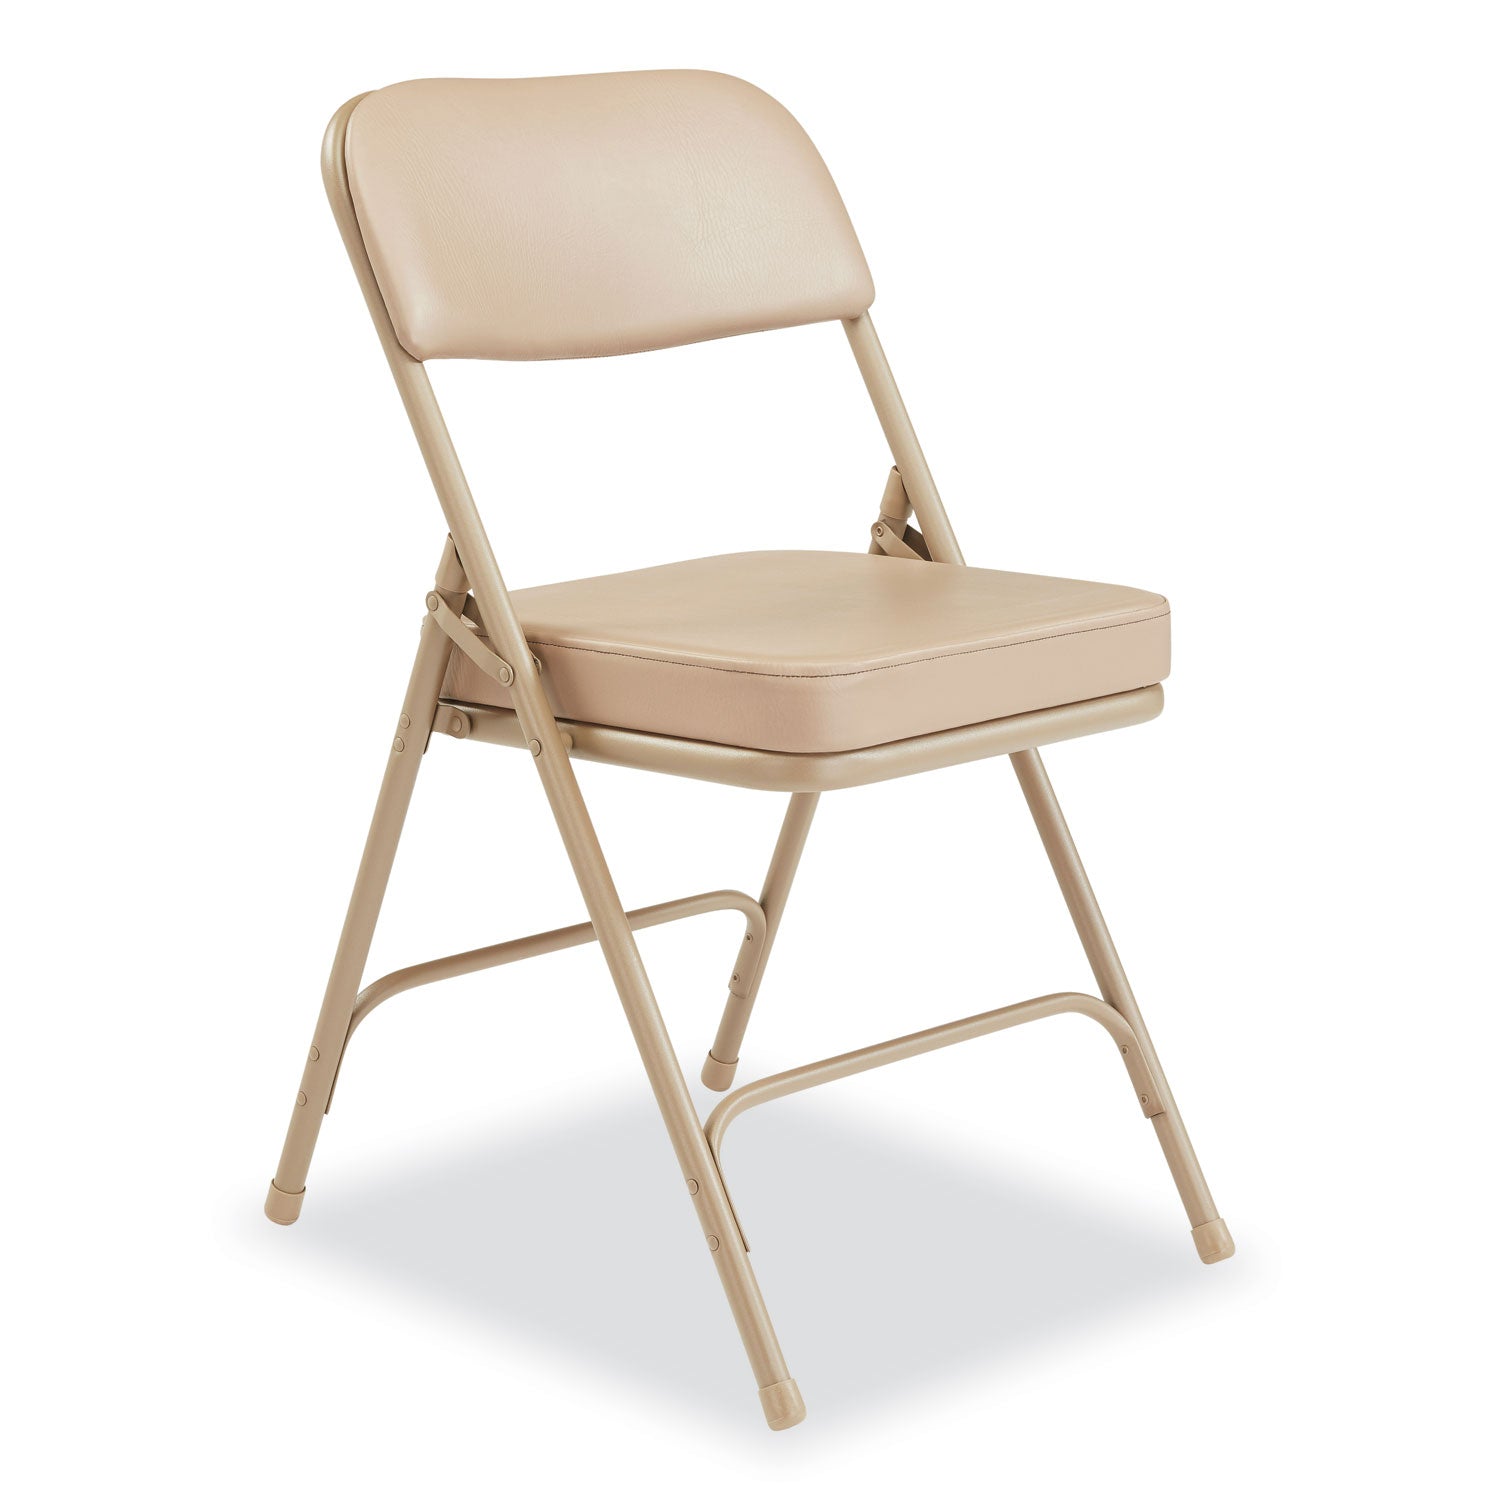 3200-series-2-vinyl-upholstered-double-hinge-folding-chair-supports-300lb-185-seat-ht-beige-2-ctships-in-1-3-bus-days_nps3201 - 2